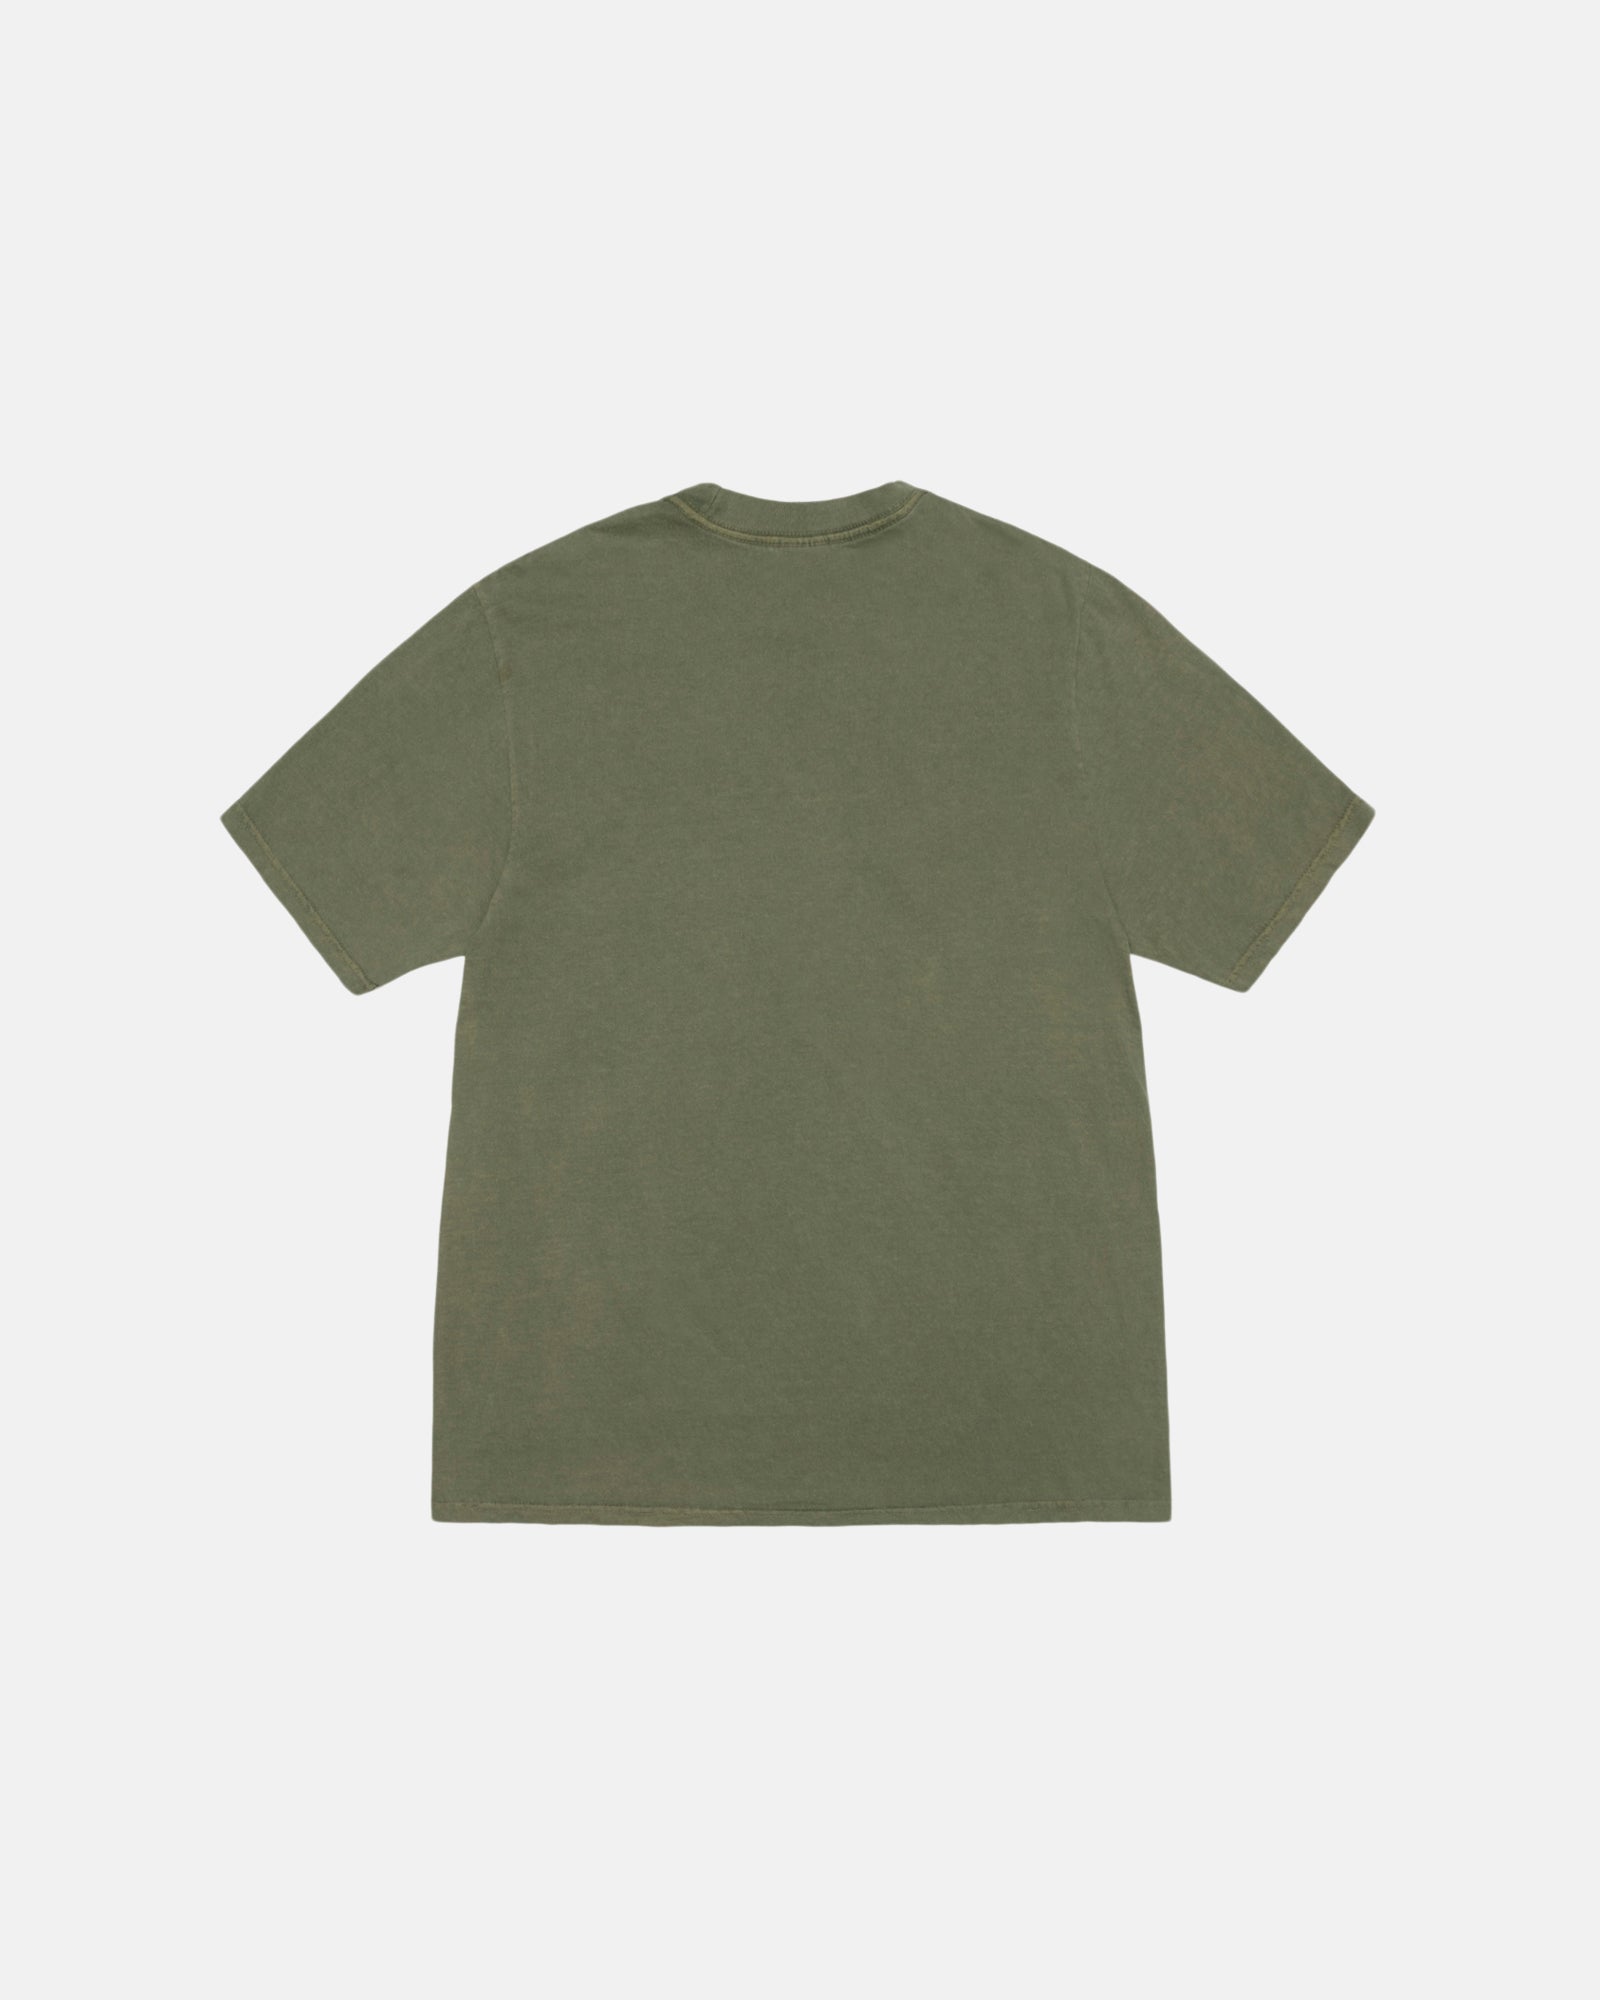 Stüssy Smooth Stock Tee Pigment Dyed Olive Shortsleeve